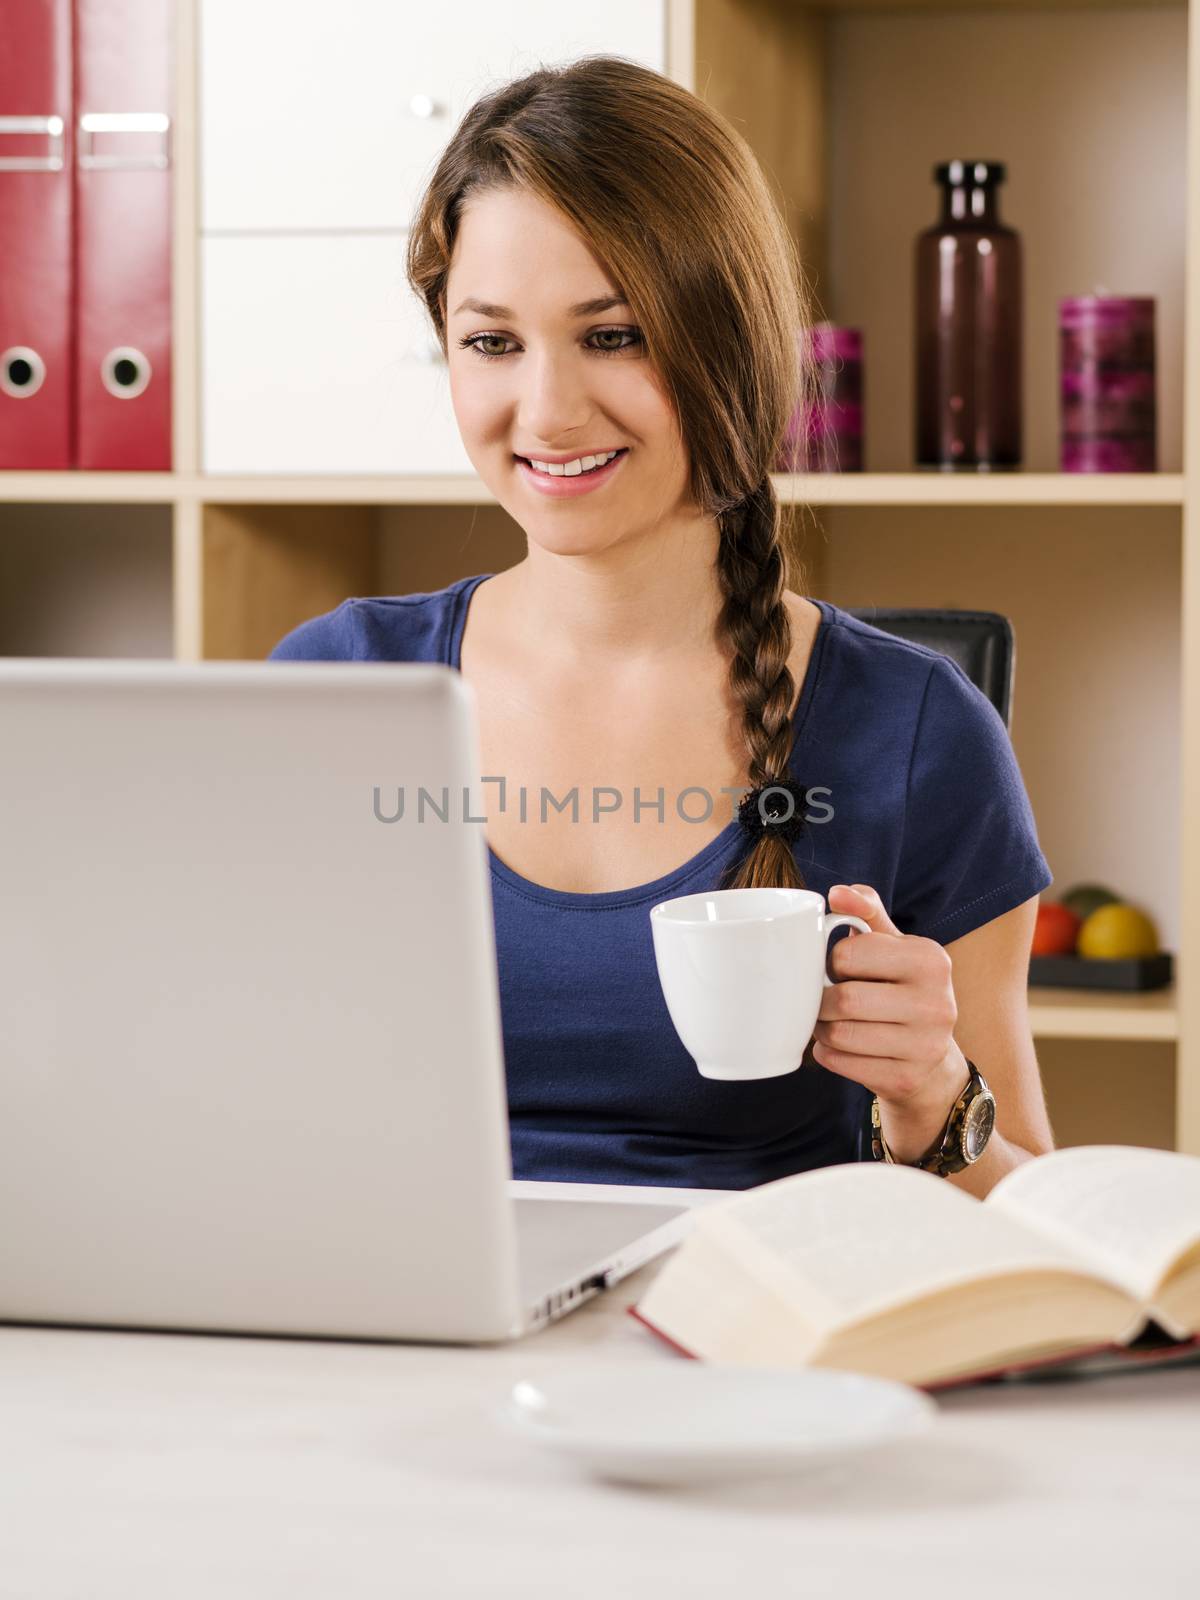 Beautiful woman smiling while using a laptop by sumners